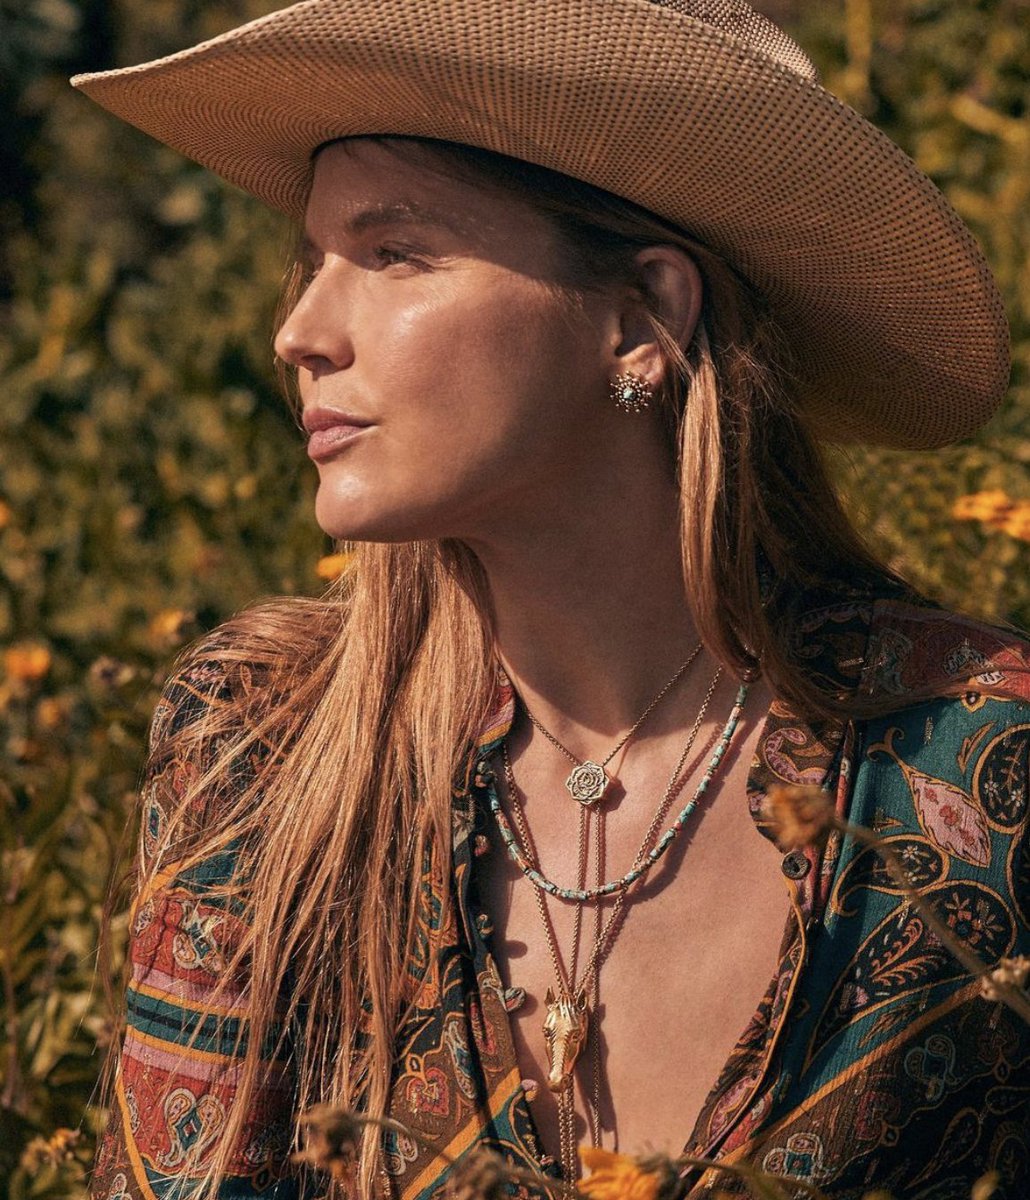 A cowgirl’s roots run deep and have many layers. 🤠✨ @kendrascott

#shoptheplaza #dallasshopping #luxuryshopping #dallastx #dallasboutique #dallaslifestyle #kendrascott #jewelry #accessories #western